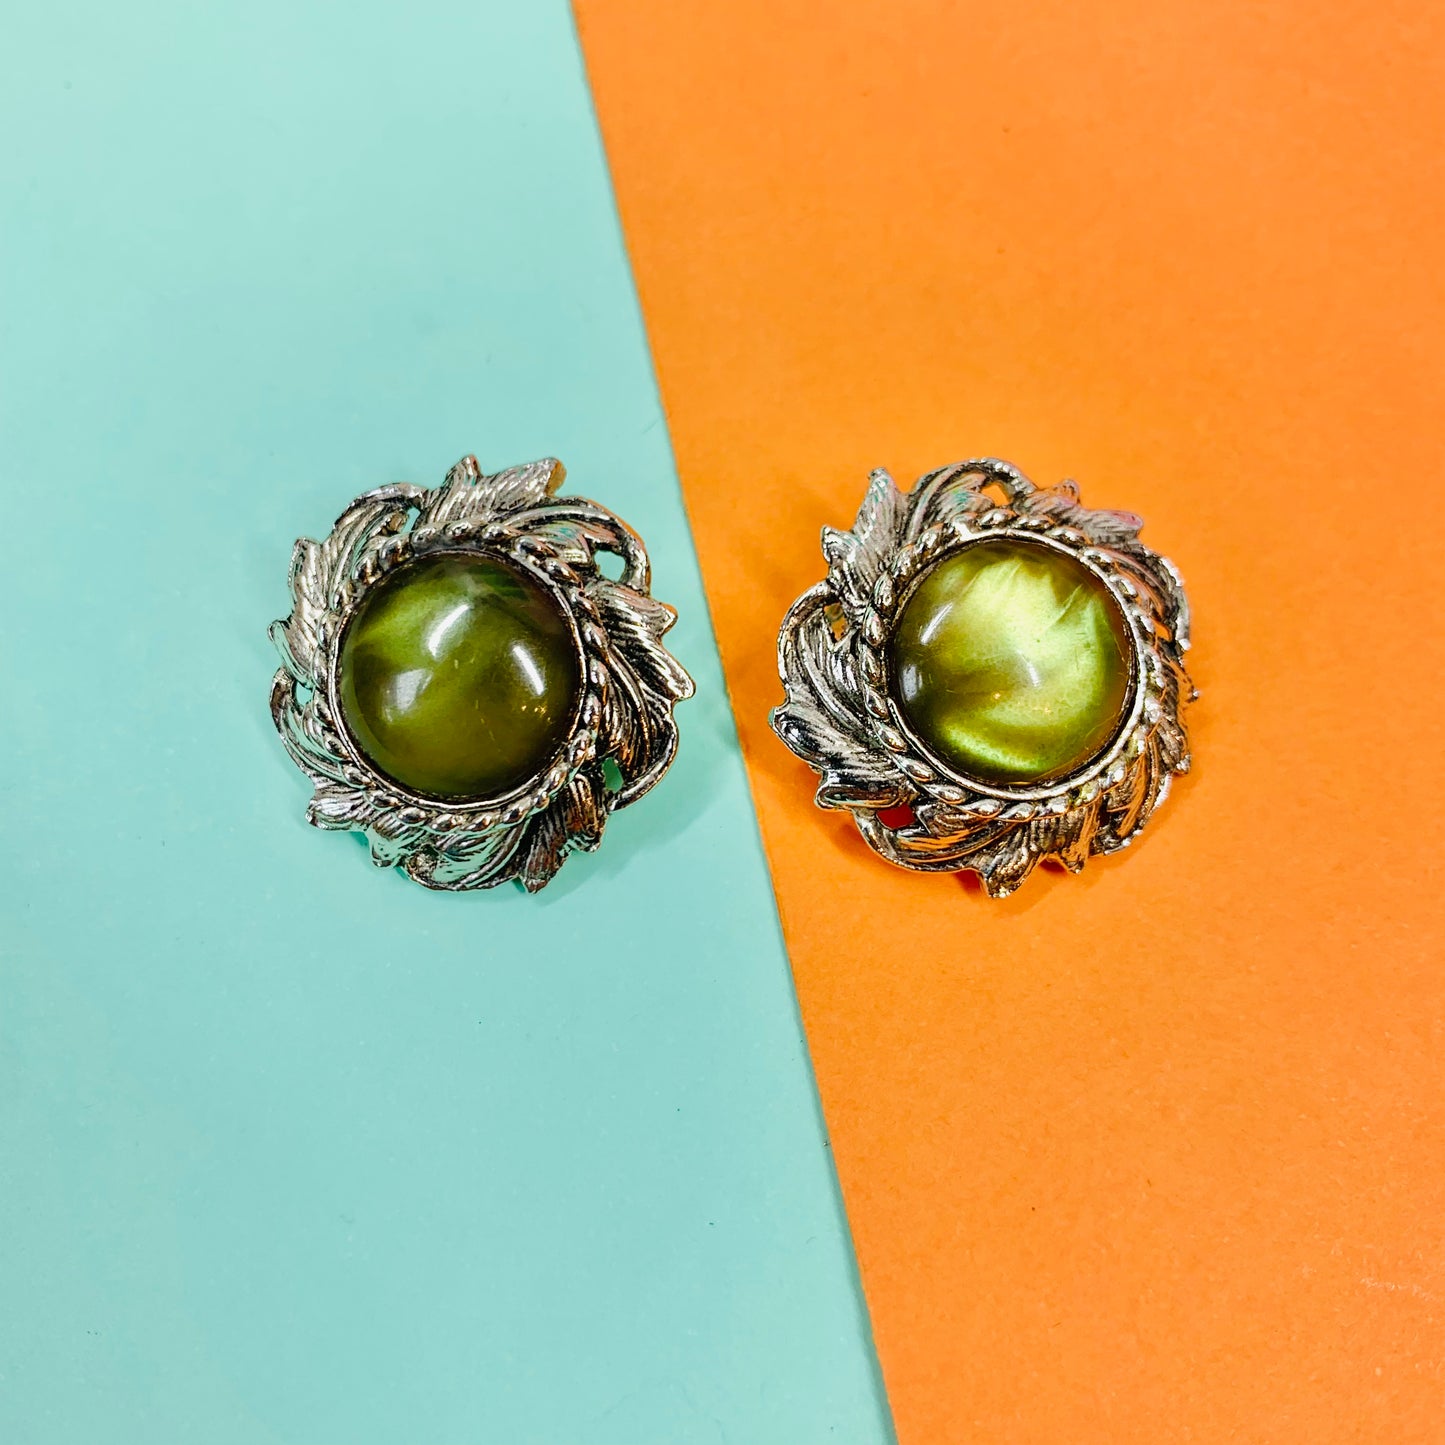 1940s silver nickel clip on earrings with green cats-eye bead